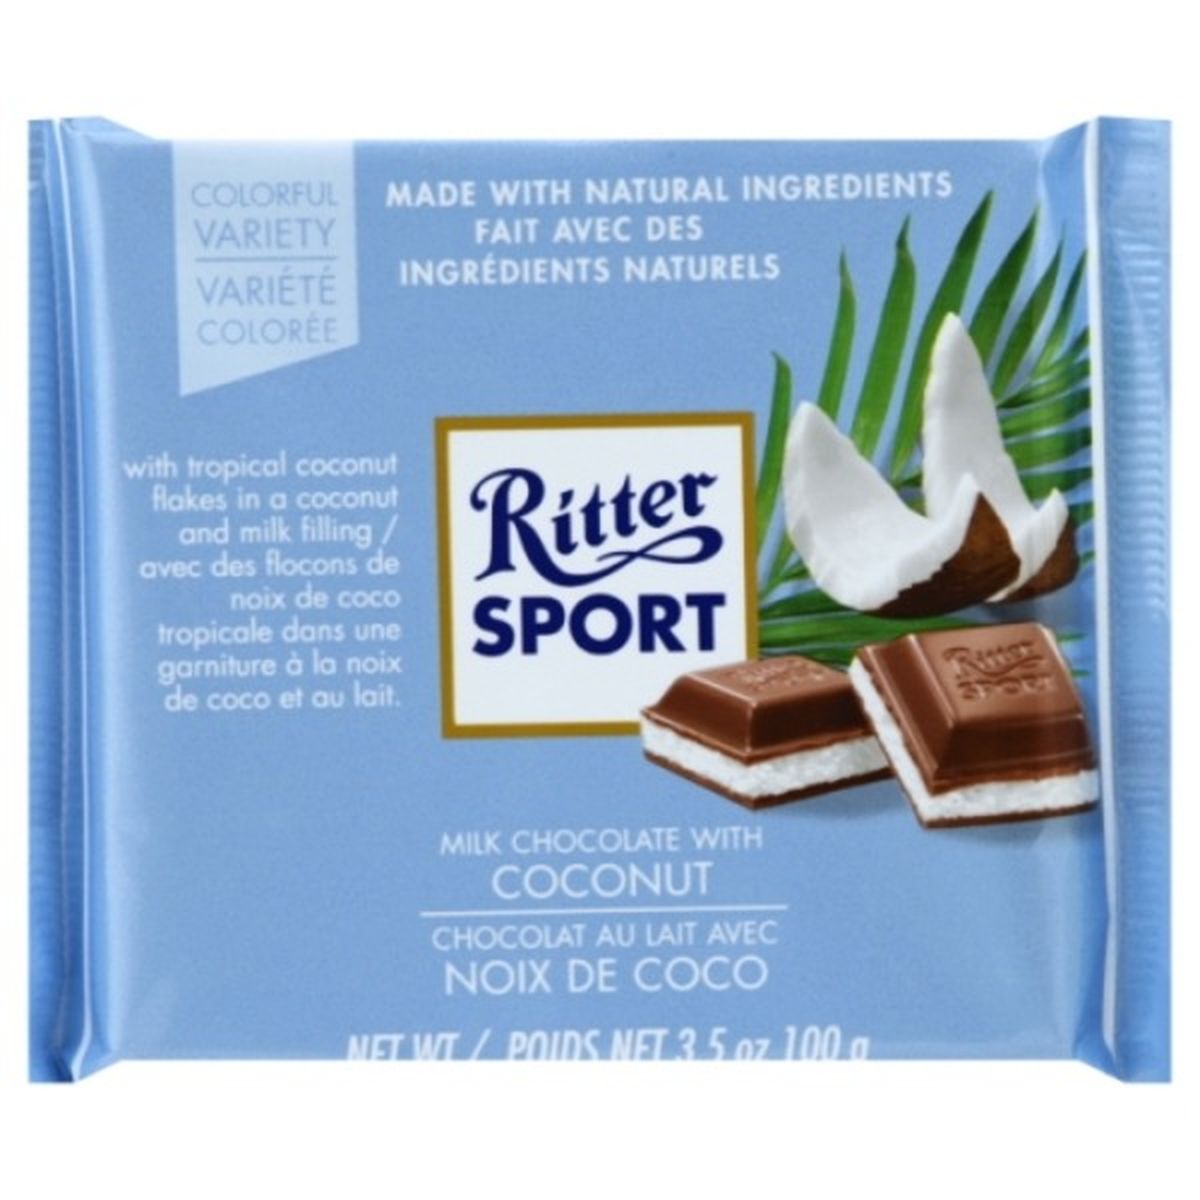 Calories in Ritter Sport Colorful Variety Milk Chocolate, with Coconut